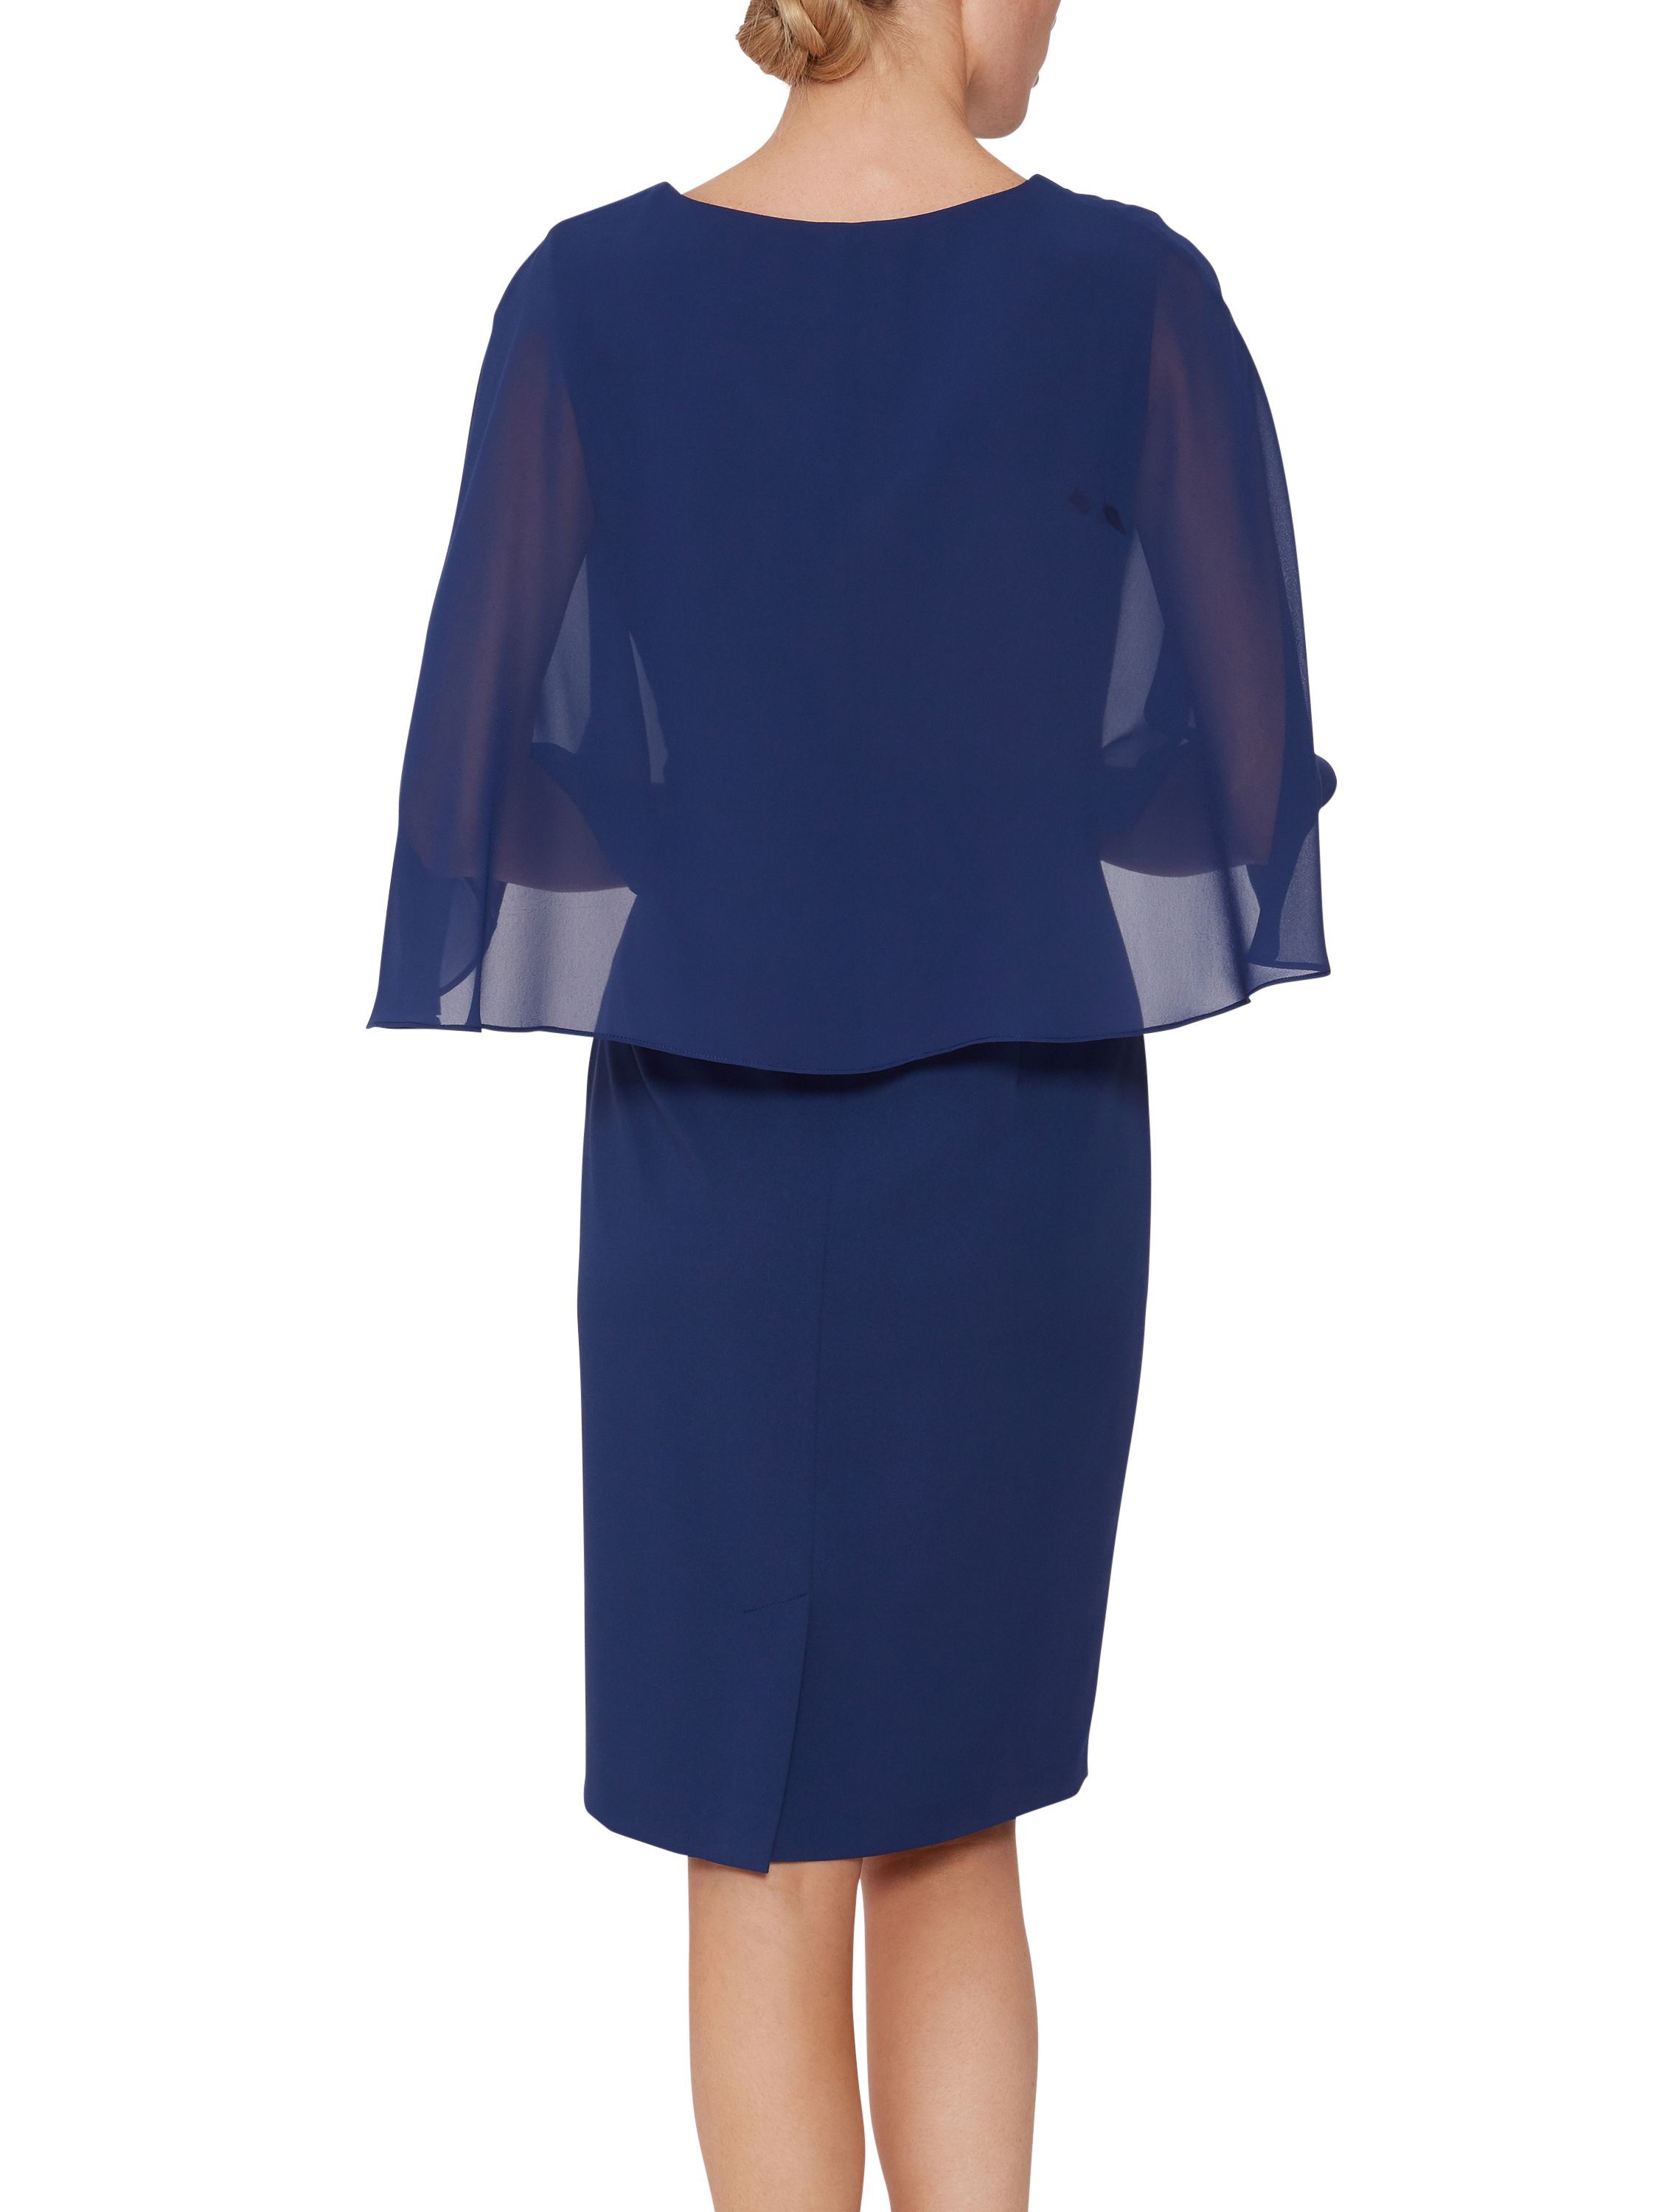 Make this stylish crepe dress and cape by Gina Bacconi one of your staple items this season. Fashioned from a gorgeous soft crepe fabric, the dress takes a simple shift shape to flatter the figure, accompanied by a cape attached at the neckline to cover the shoulders, featuring a guipure lace bodice underneath the cape for extra detailing. Fastened with a concealed side zip.